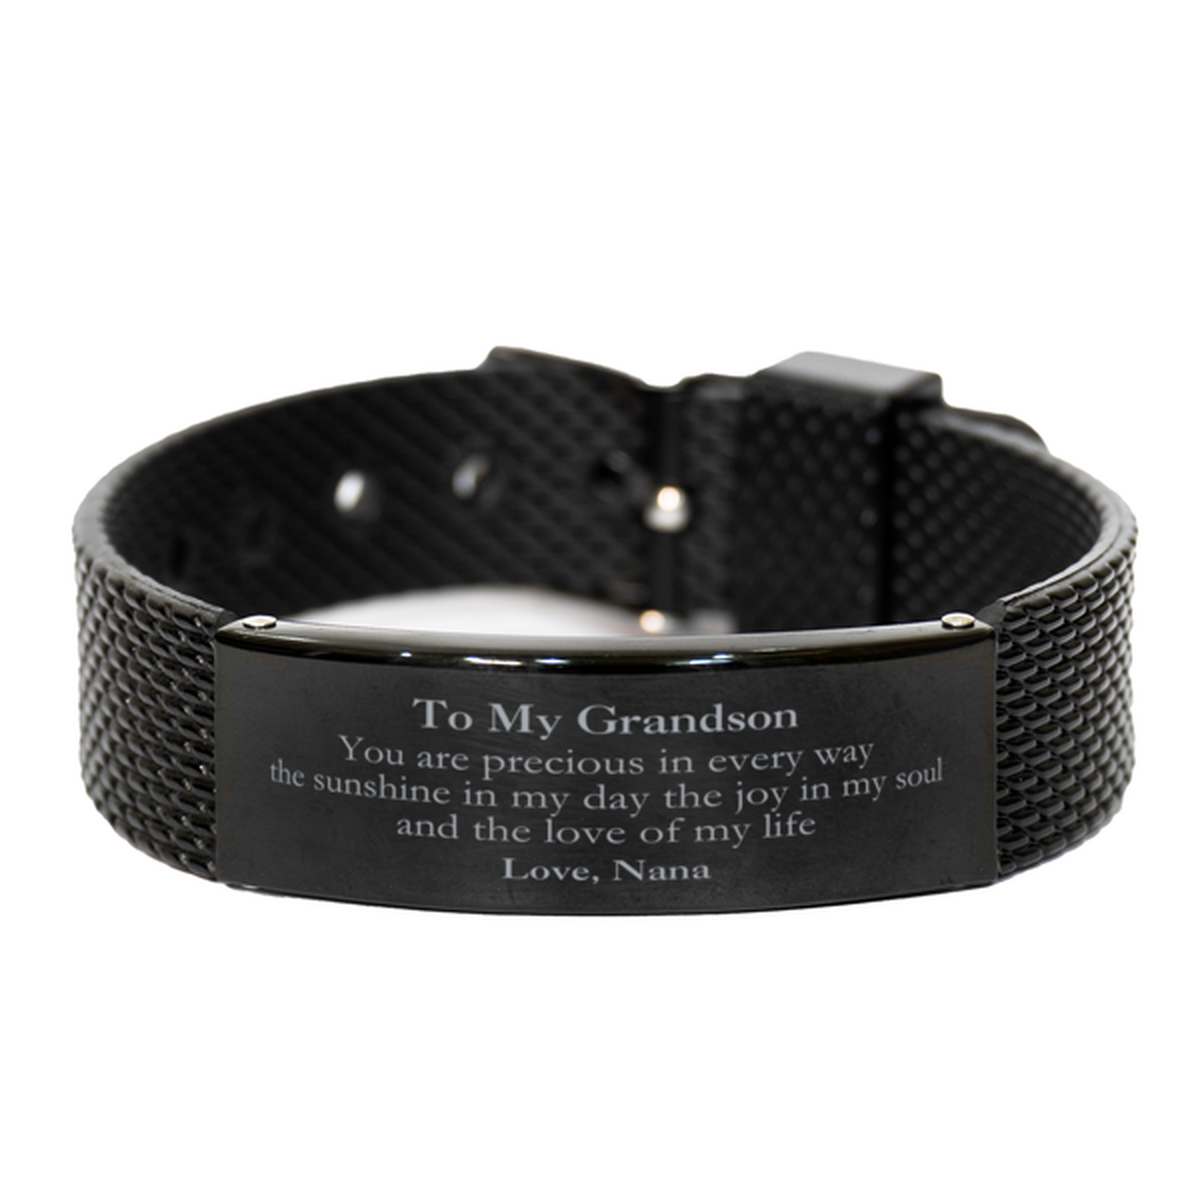 Graduation Gifts for Grandson Black Shark Mesh Bracelet Present from Nana, Christmas Grandson Birthday Gifts Grandson You are precious in every way the sunshine in my day. Love, Nana